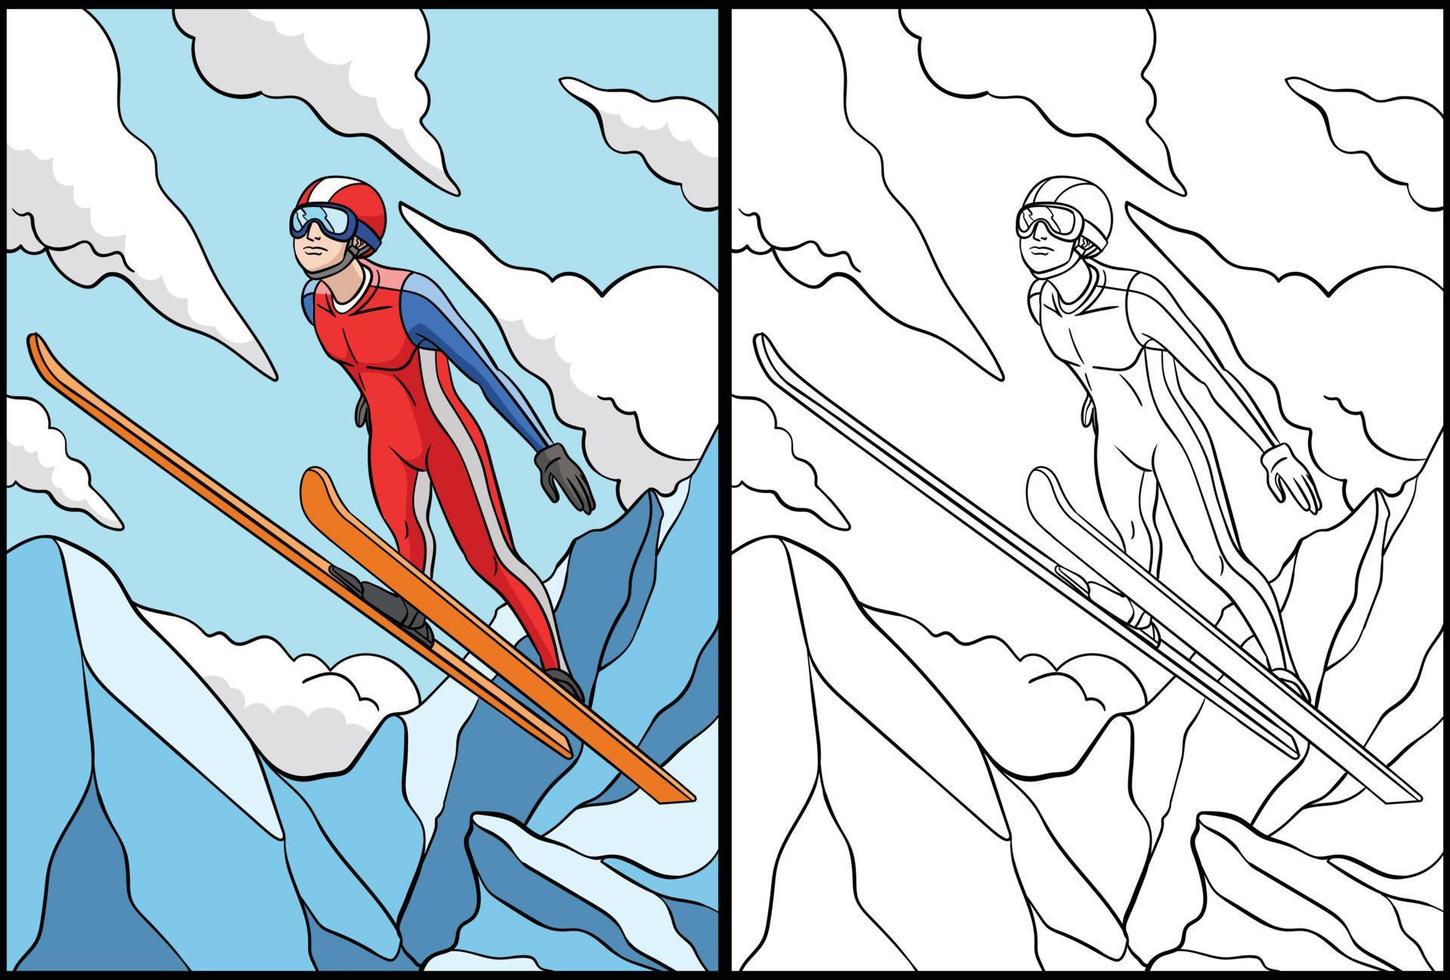 Ski Jumping Coloring Page Colored Illustration vector